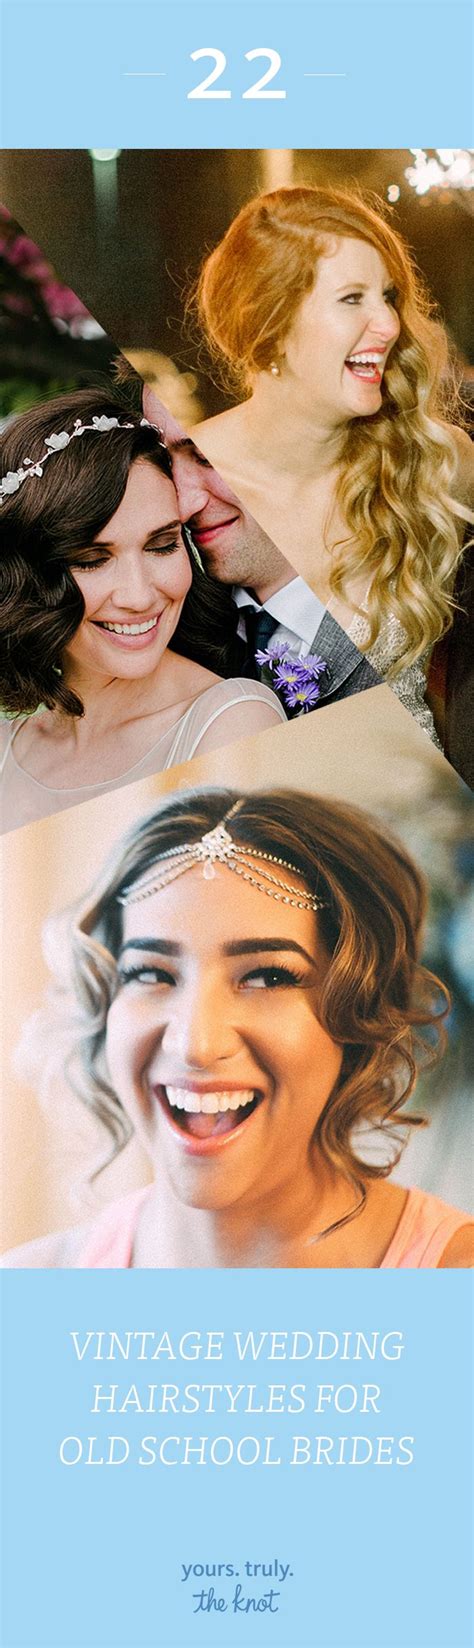 29 Vintage Wedding Hairstyles That Will Take You Back In Time Vintage